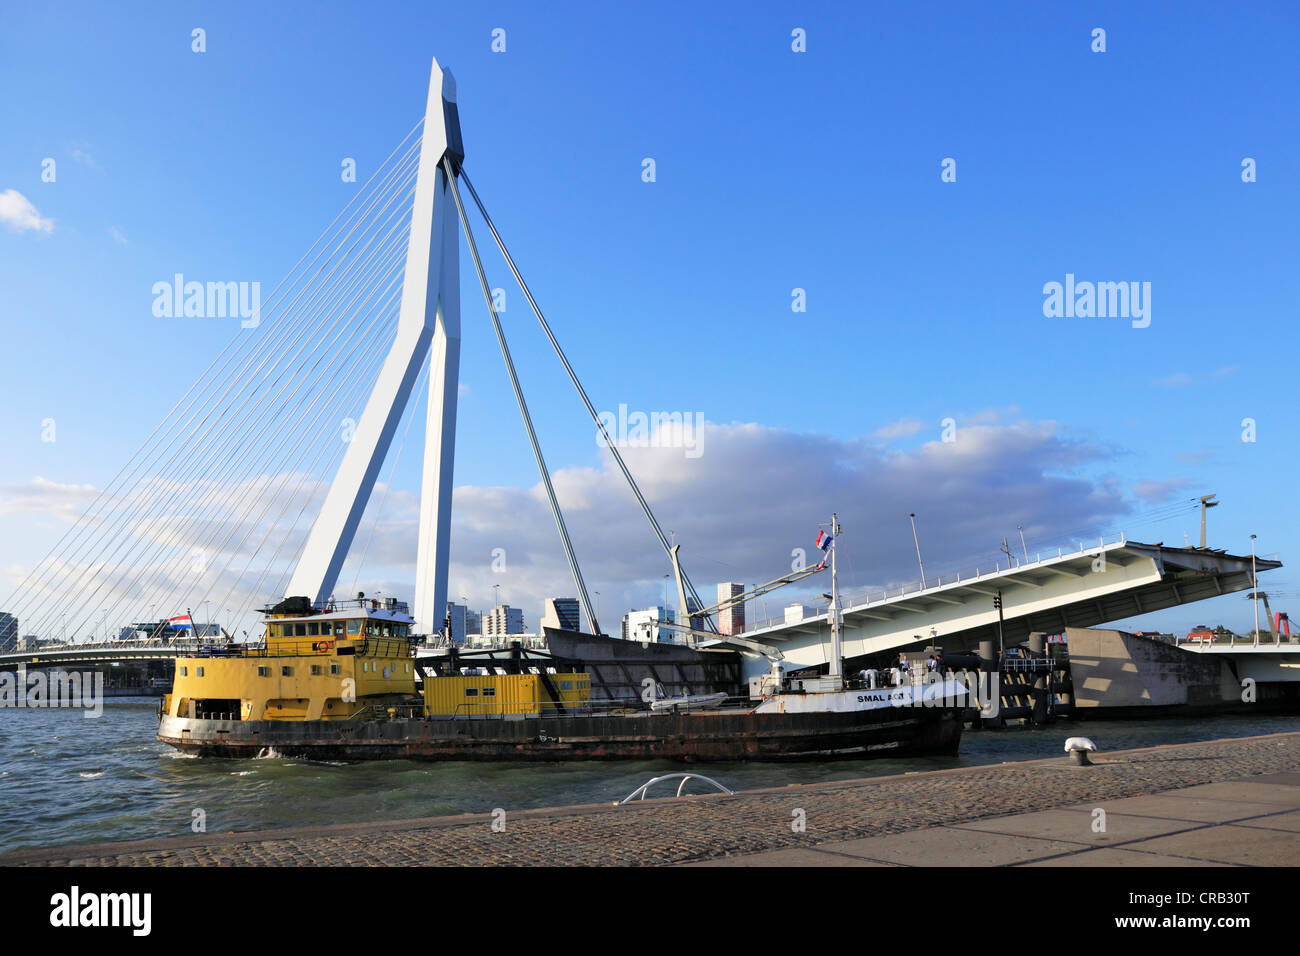 Ship in front of Erasmus Bridge, a cable-stayed bascule bridge, Rotterdam, Holland, Netherlands, Europe Stock Photo